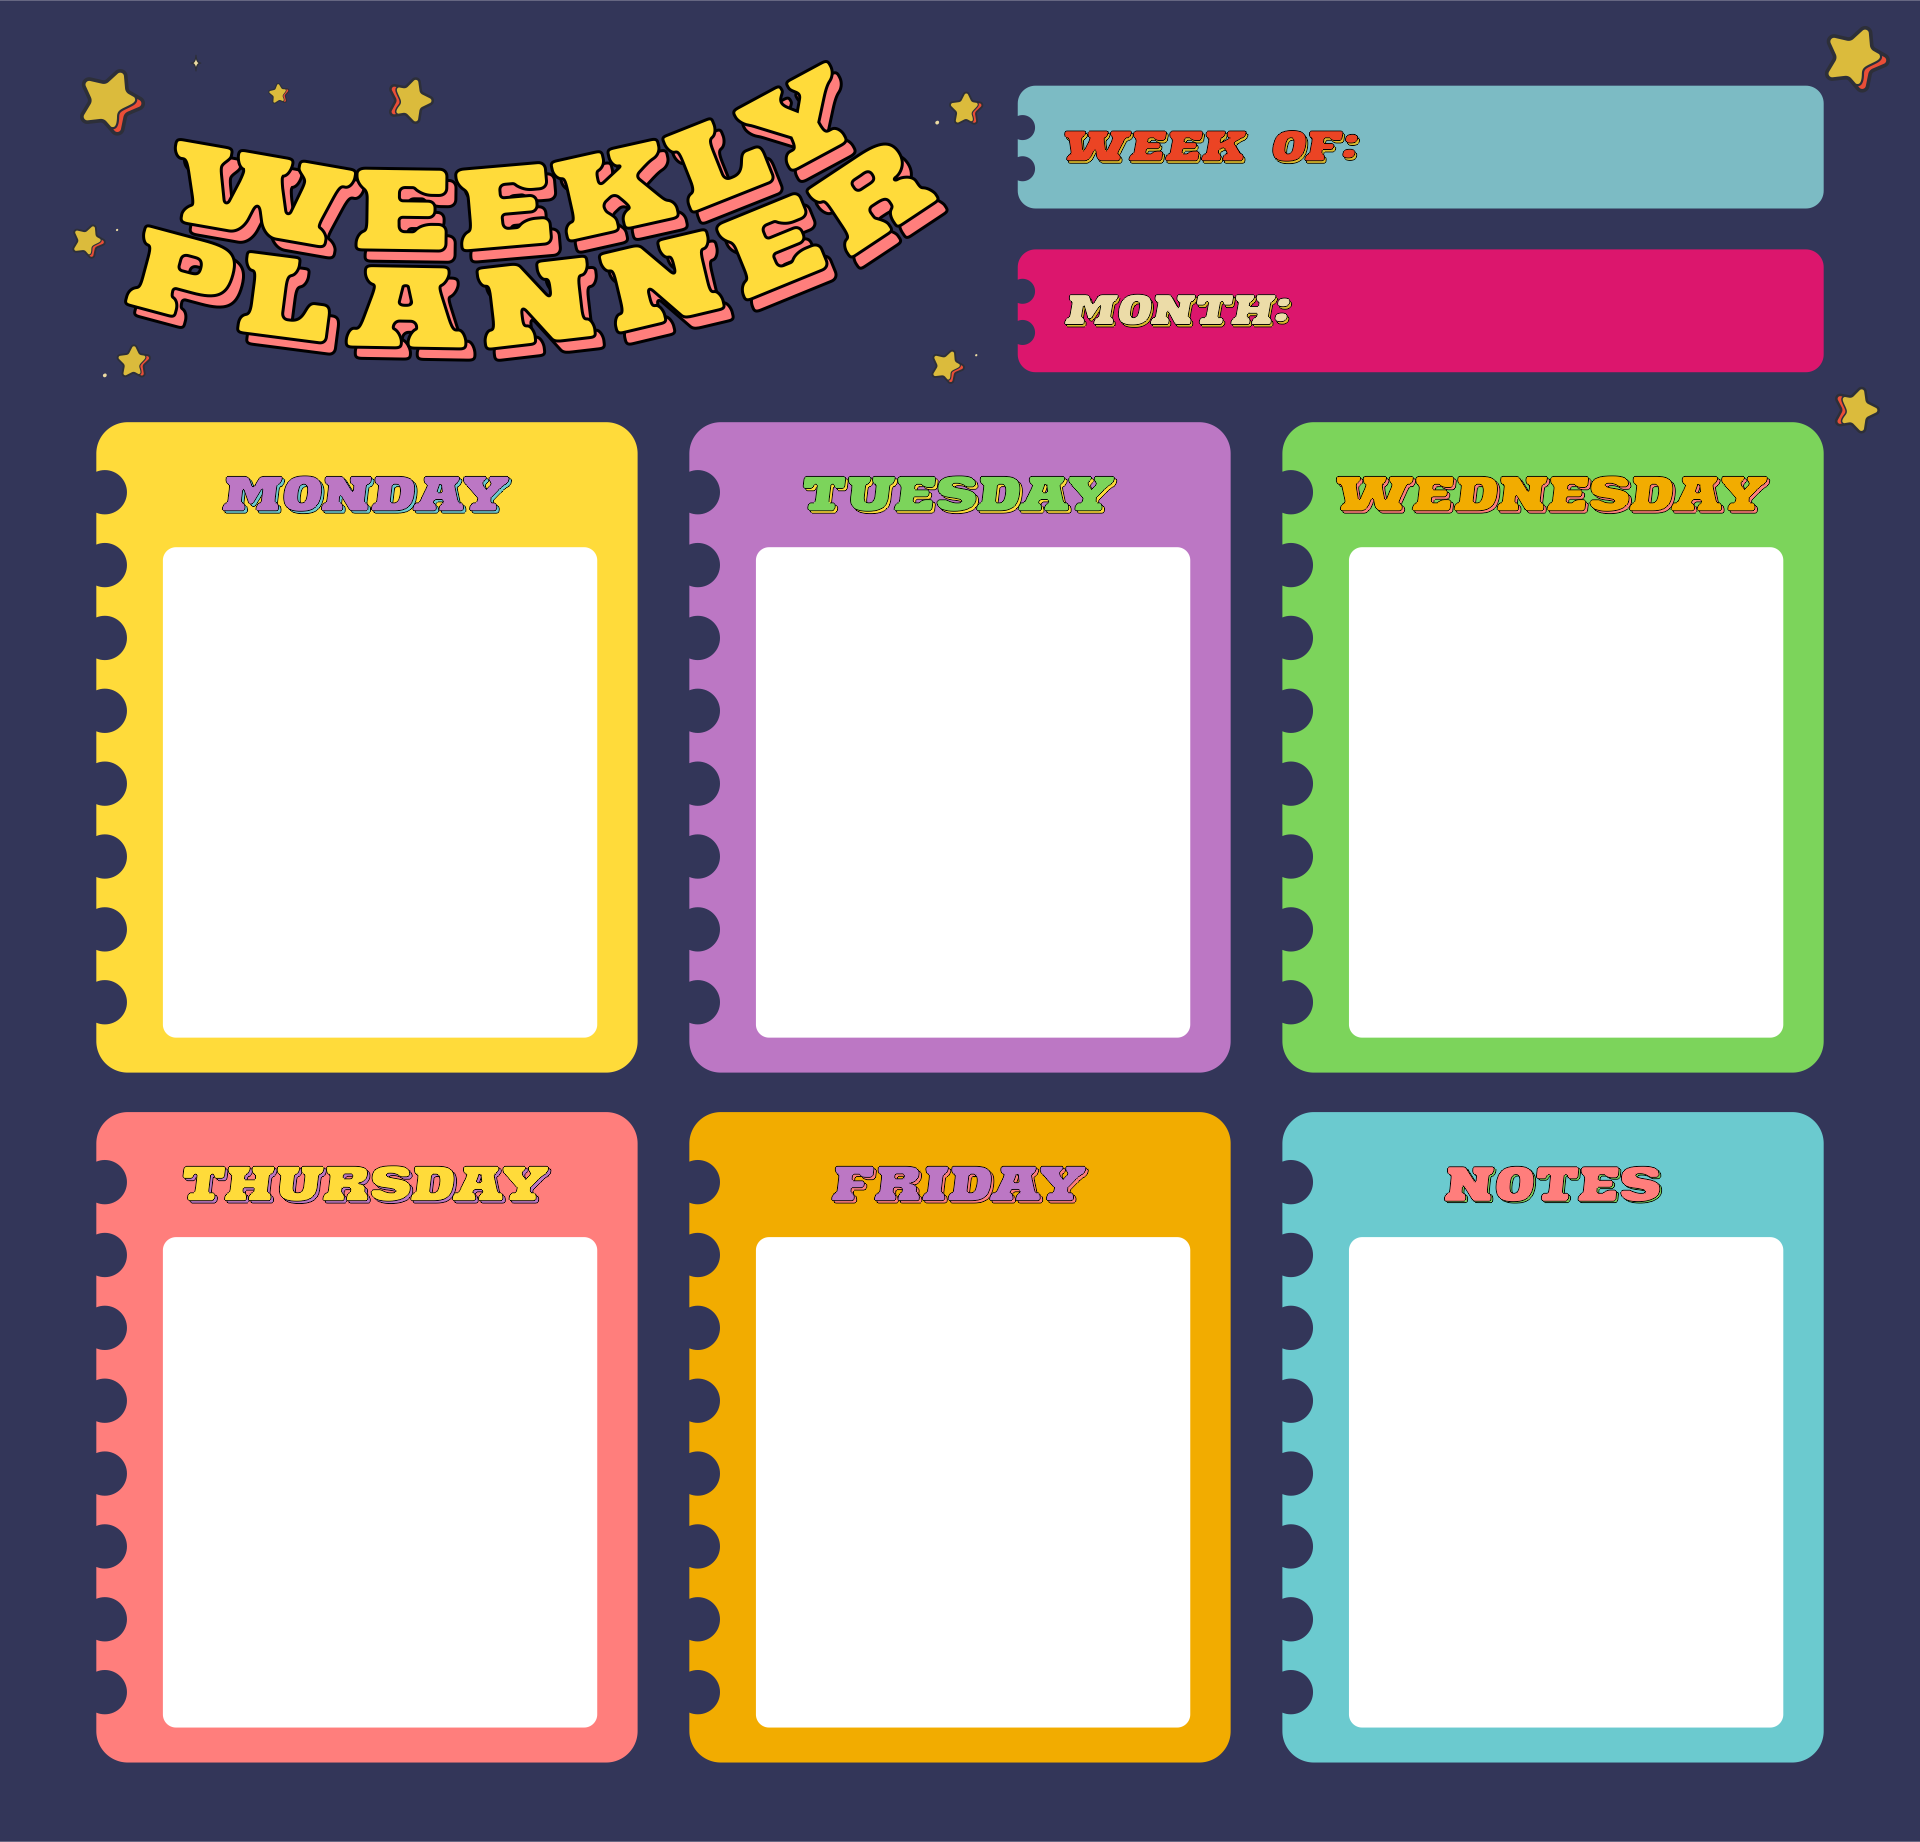 free-weekly-planner-template-monday-to-friday-schedule-printable-get